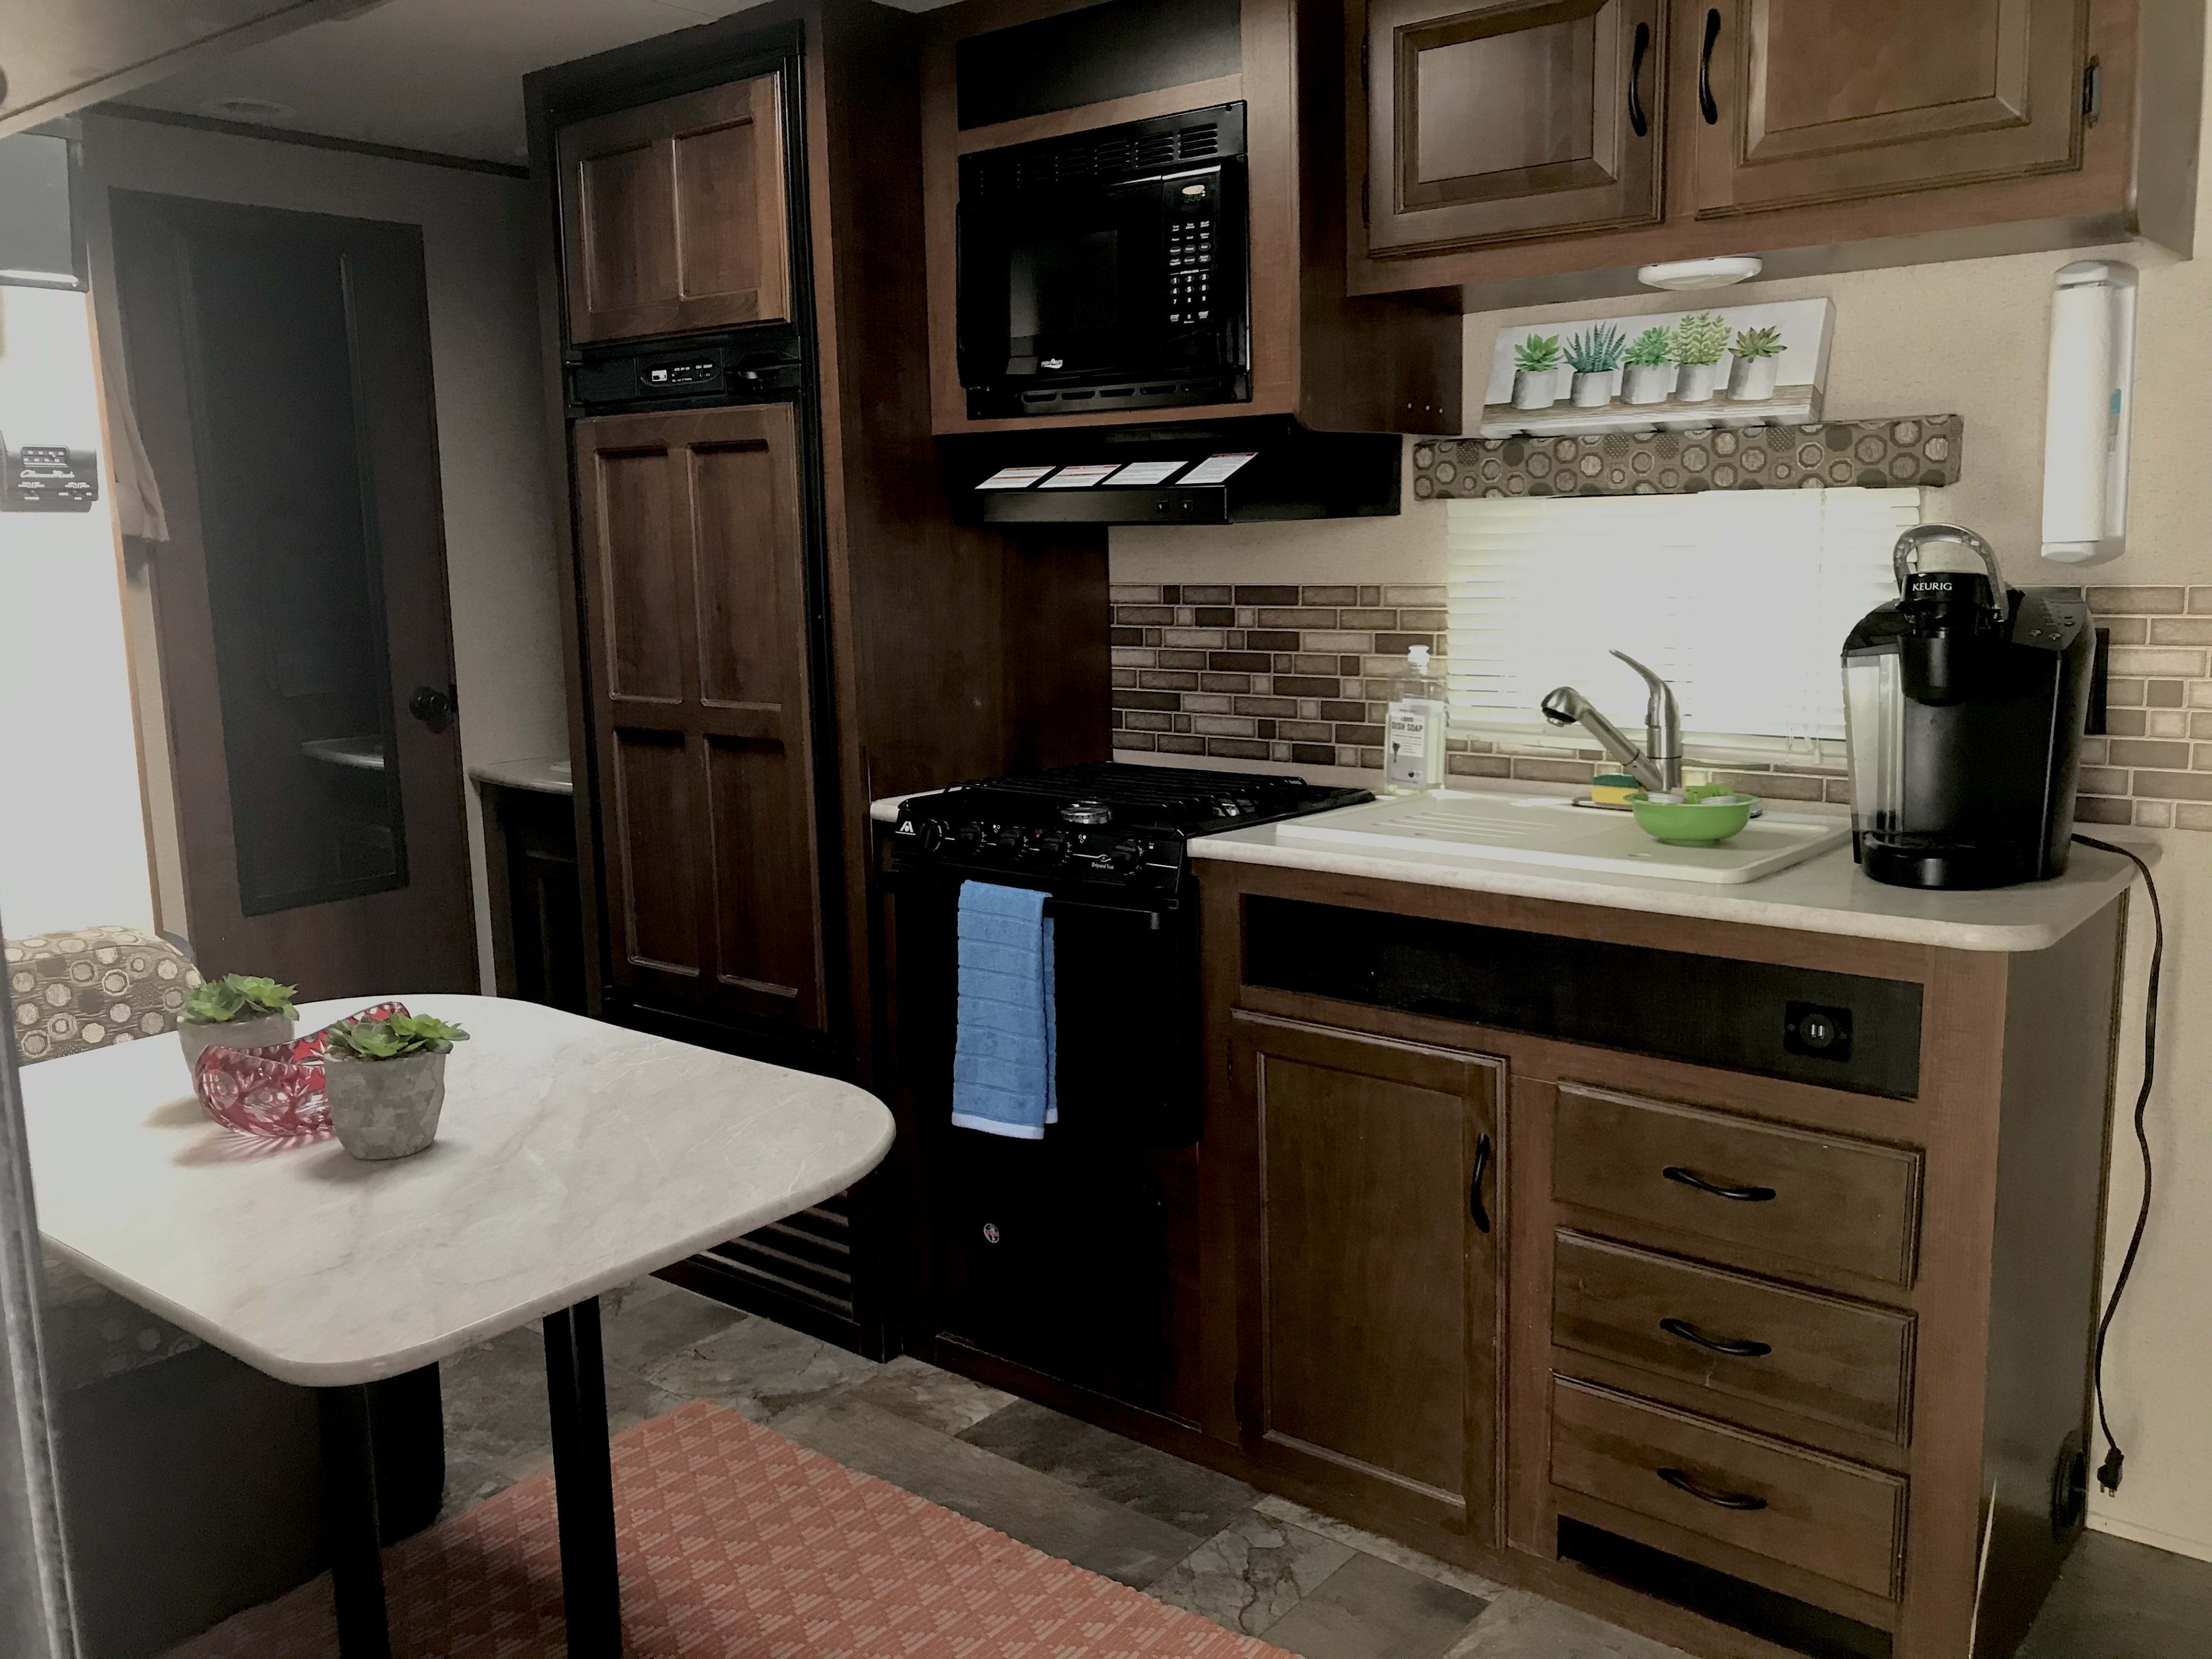 Kitchenette space with Fridge/ freezer, microwave, stove and small trailer over. 